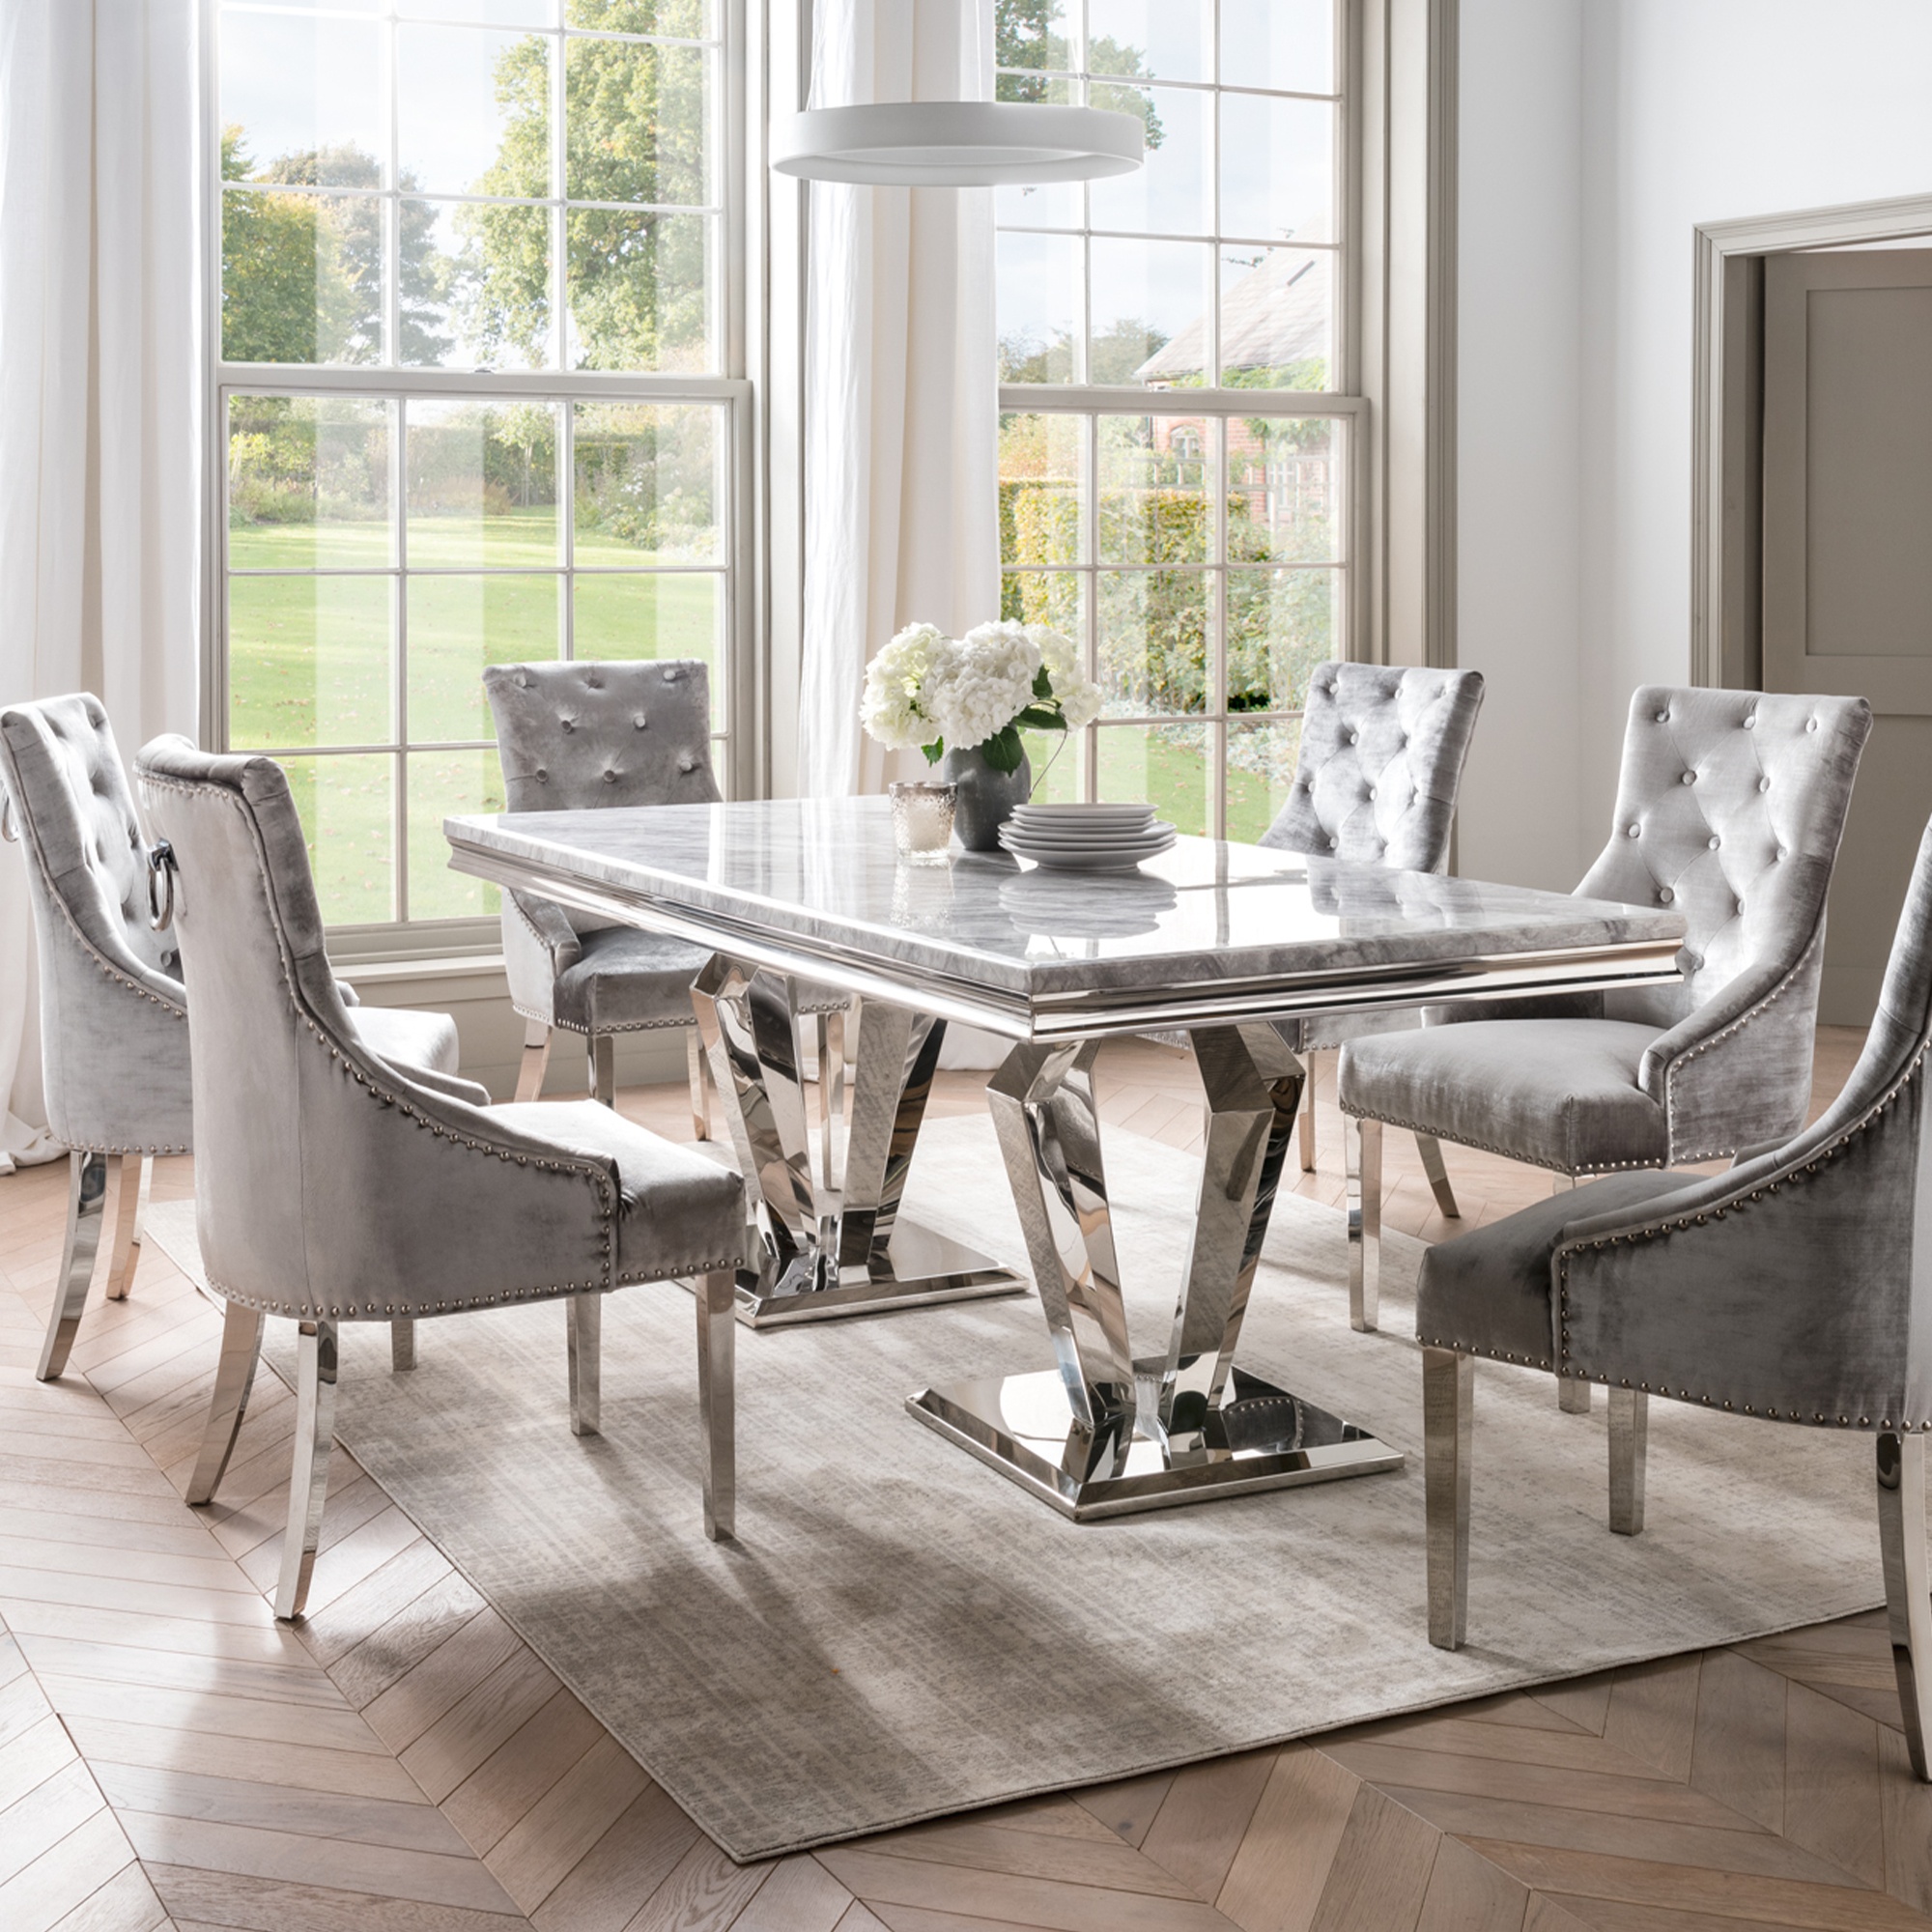 Abigail Dining Table & 6 Chairs - Cookes Furniture